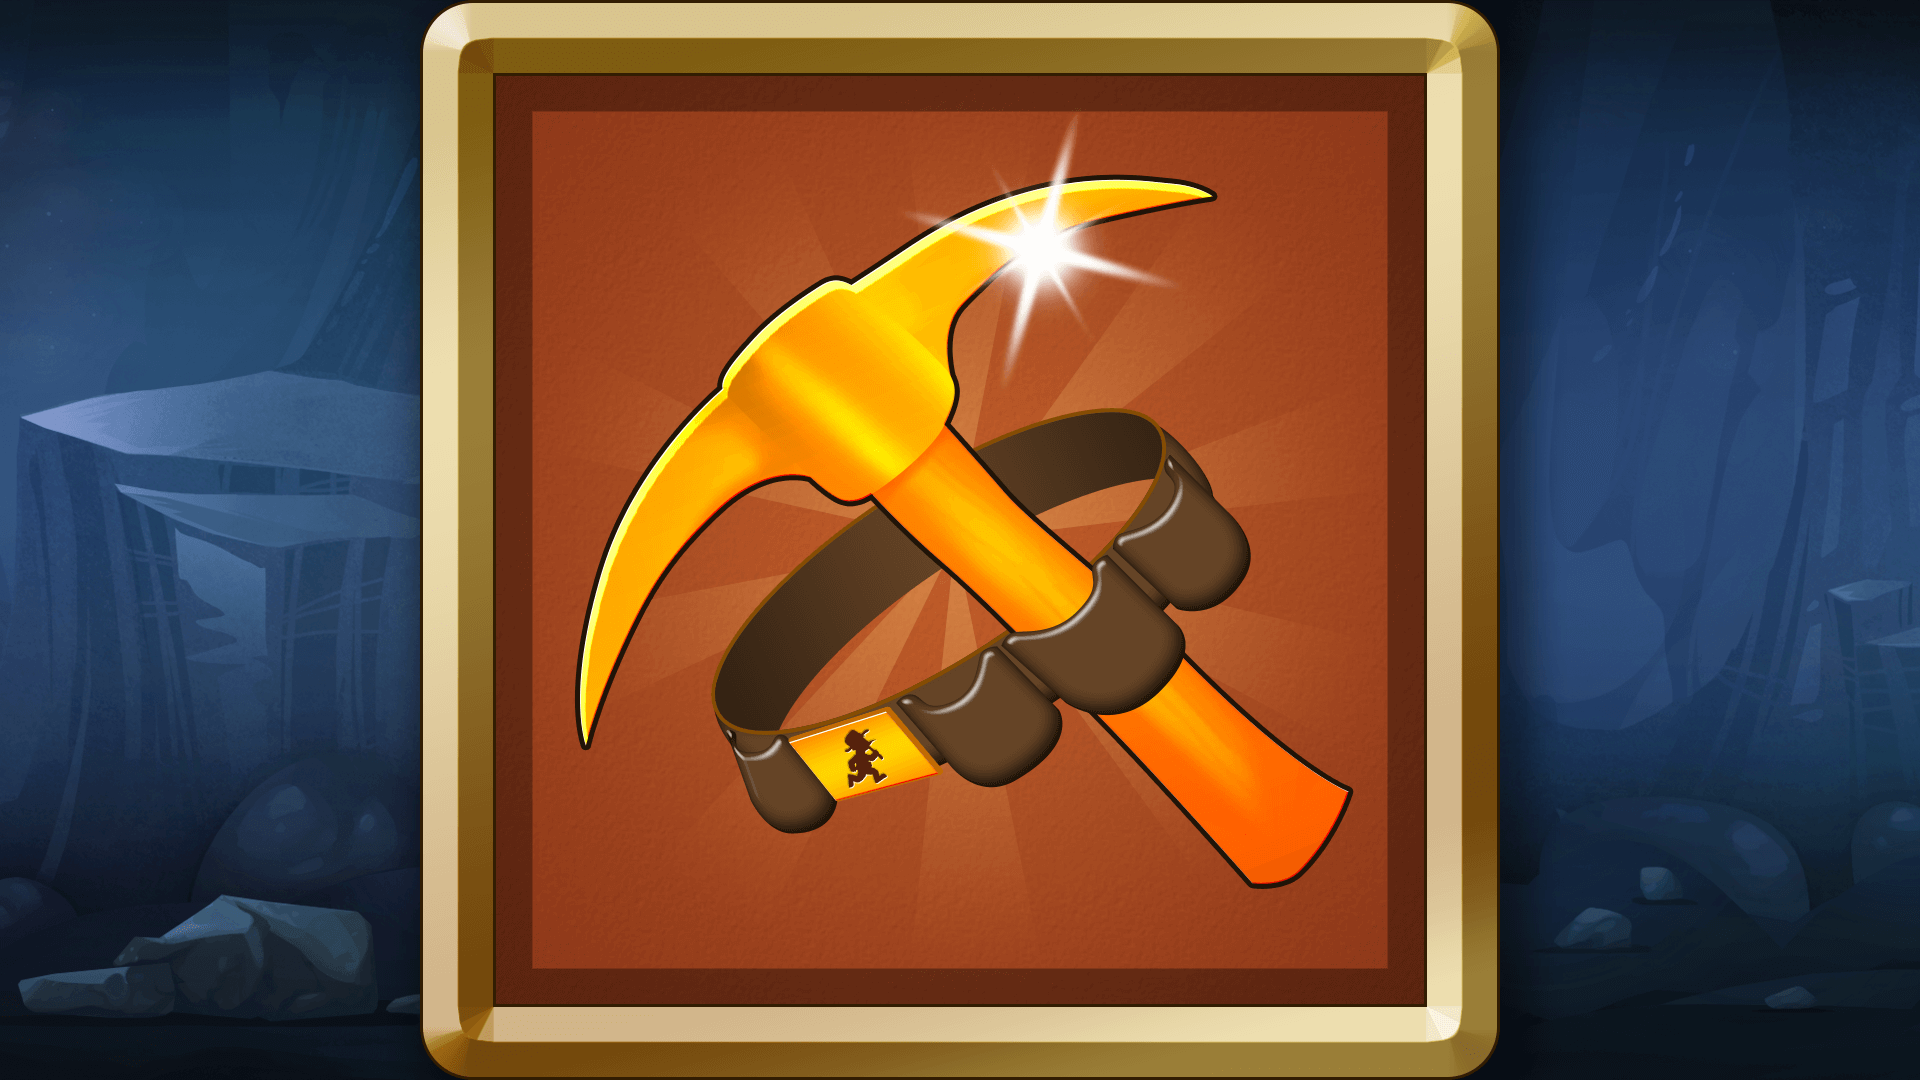 Icon for Master Miner